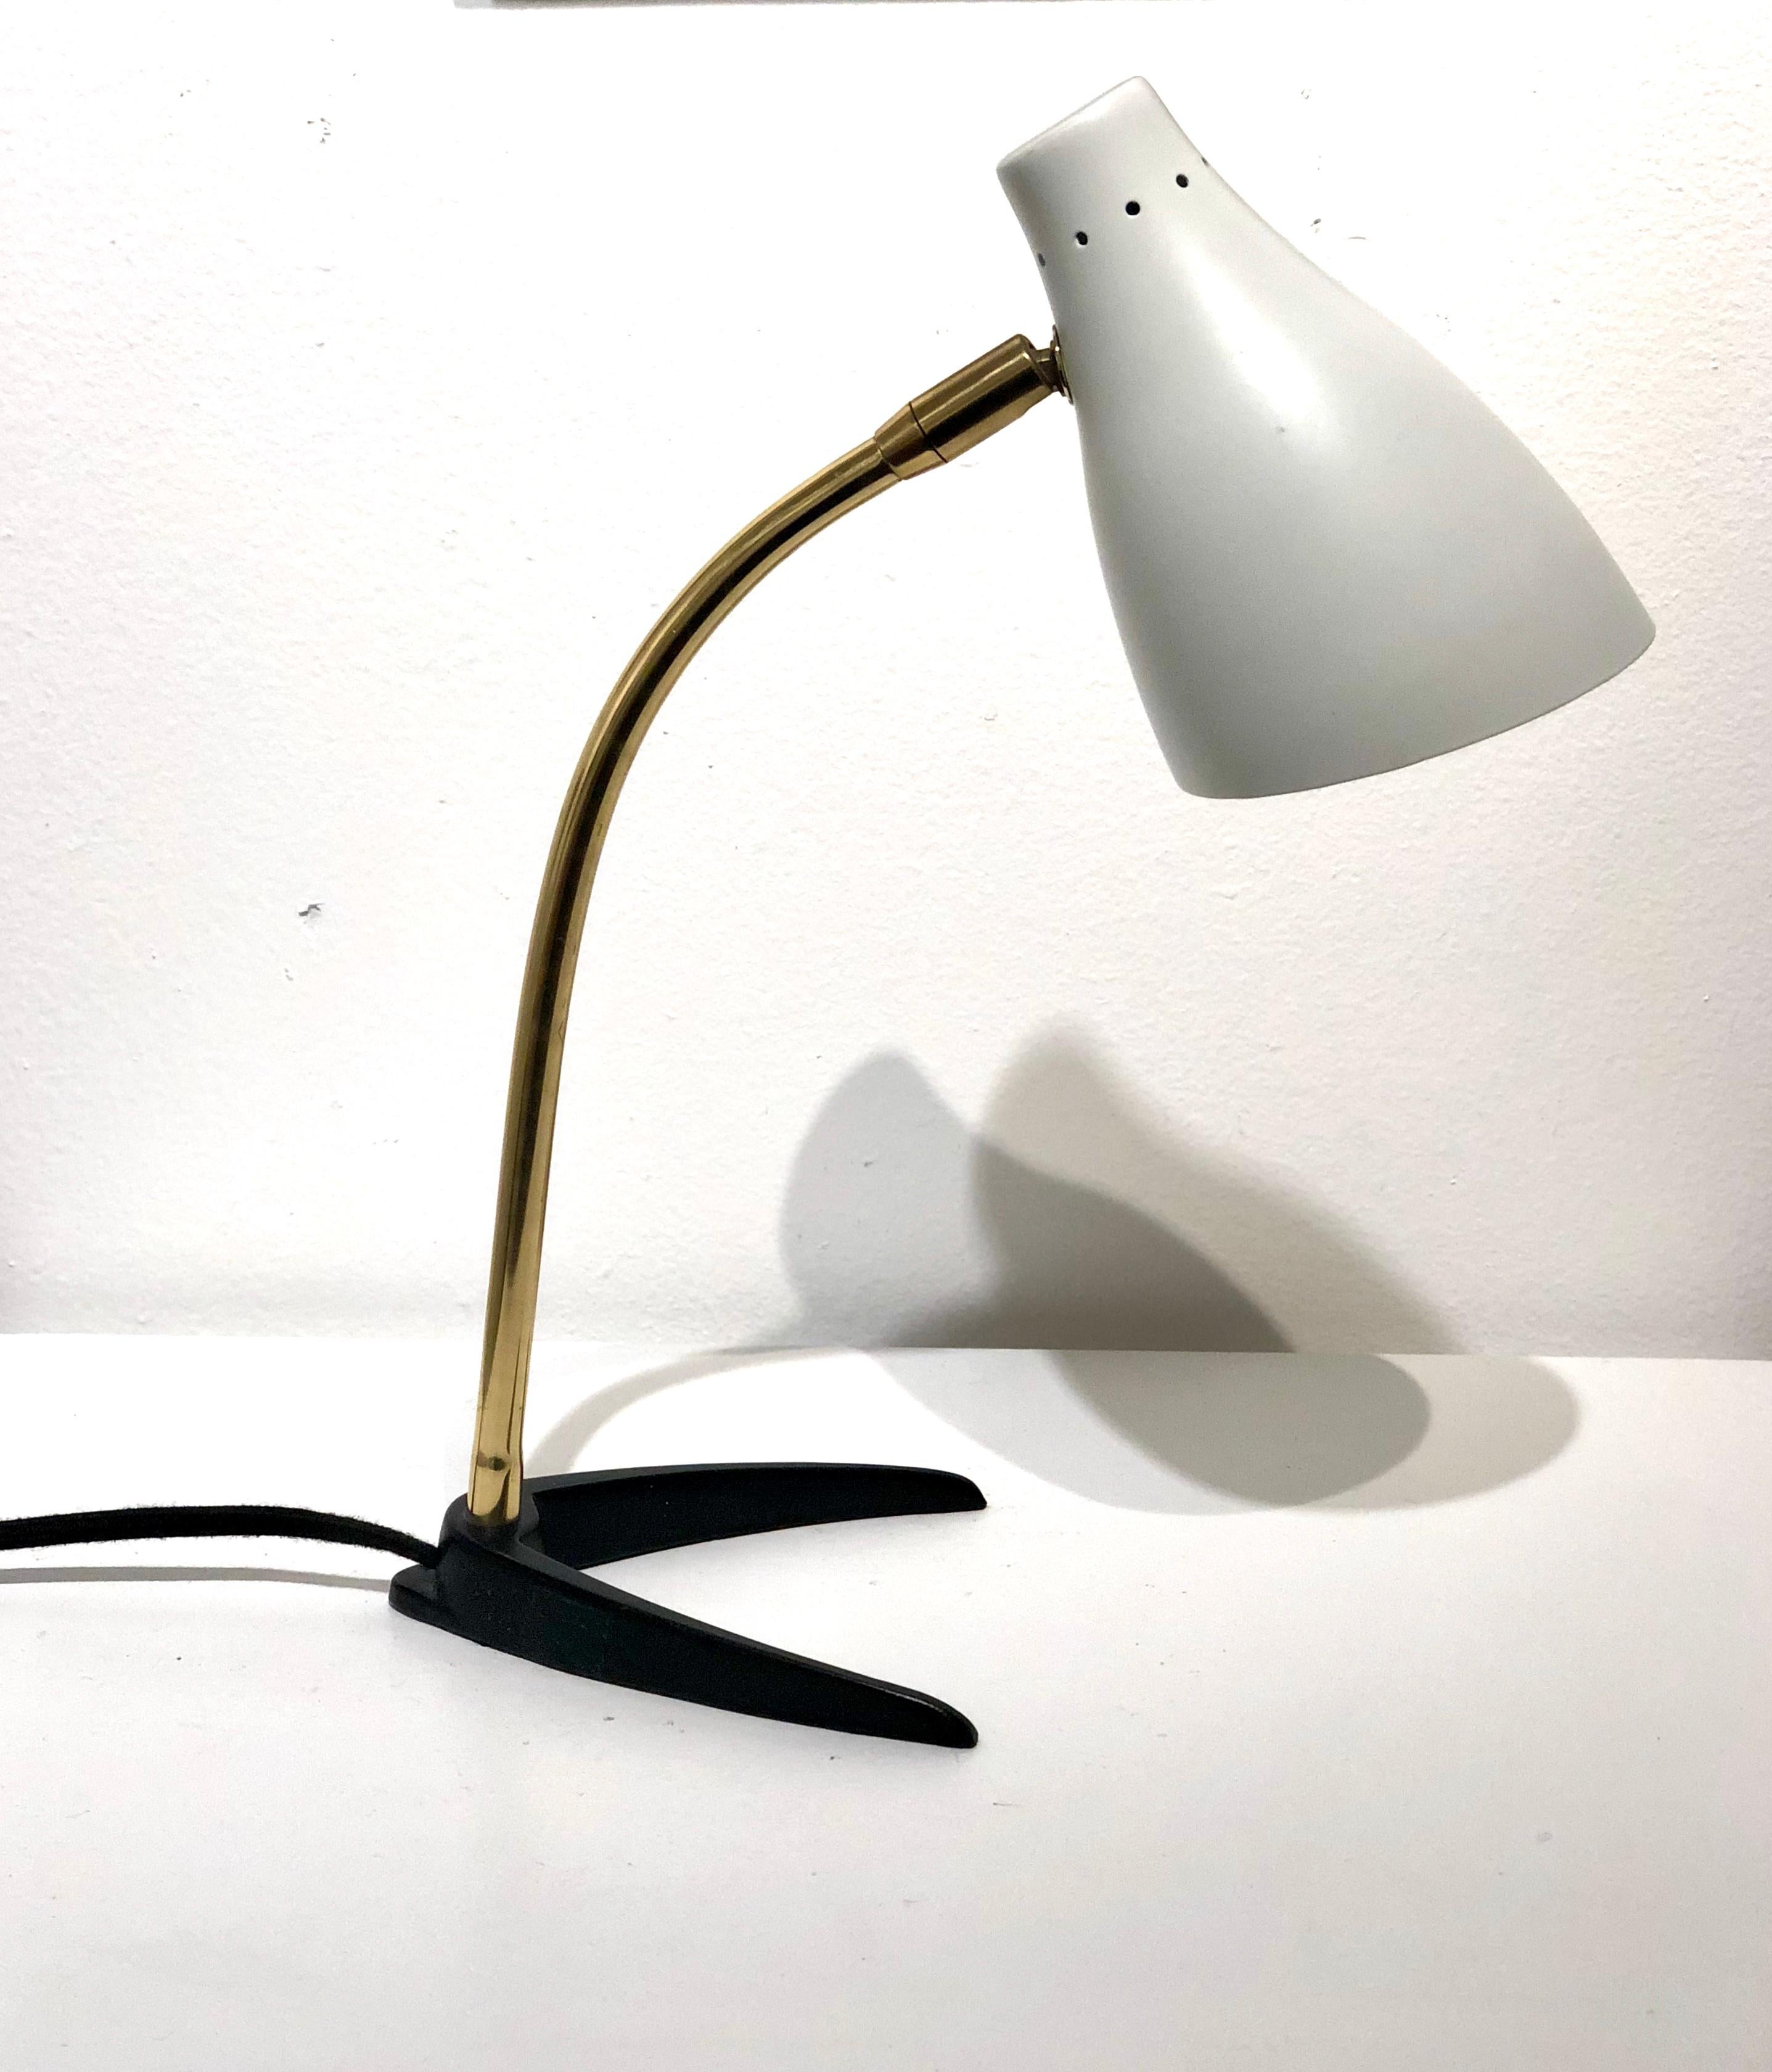 Beautiful Italian design multidirectional desk lamp, white enameled metal shade, with brass polished arm that moves up and down side to side, on iron base freshly rewired new socket totally restored like new condition.